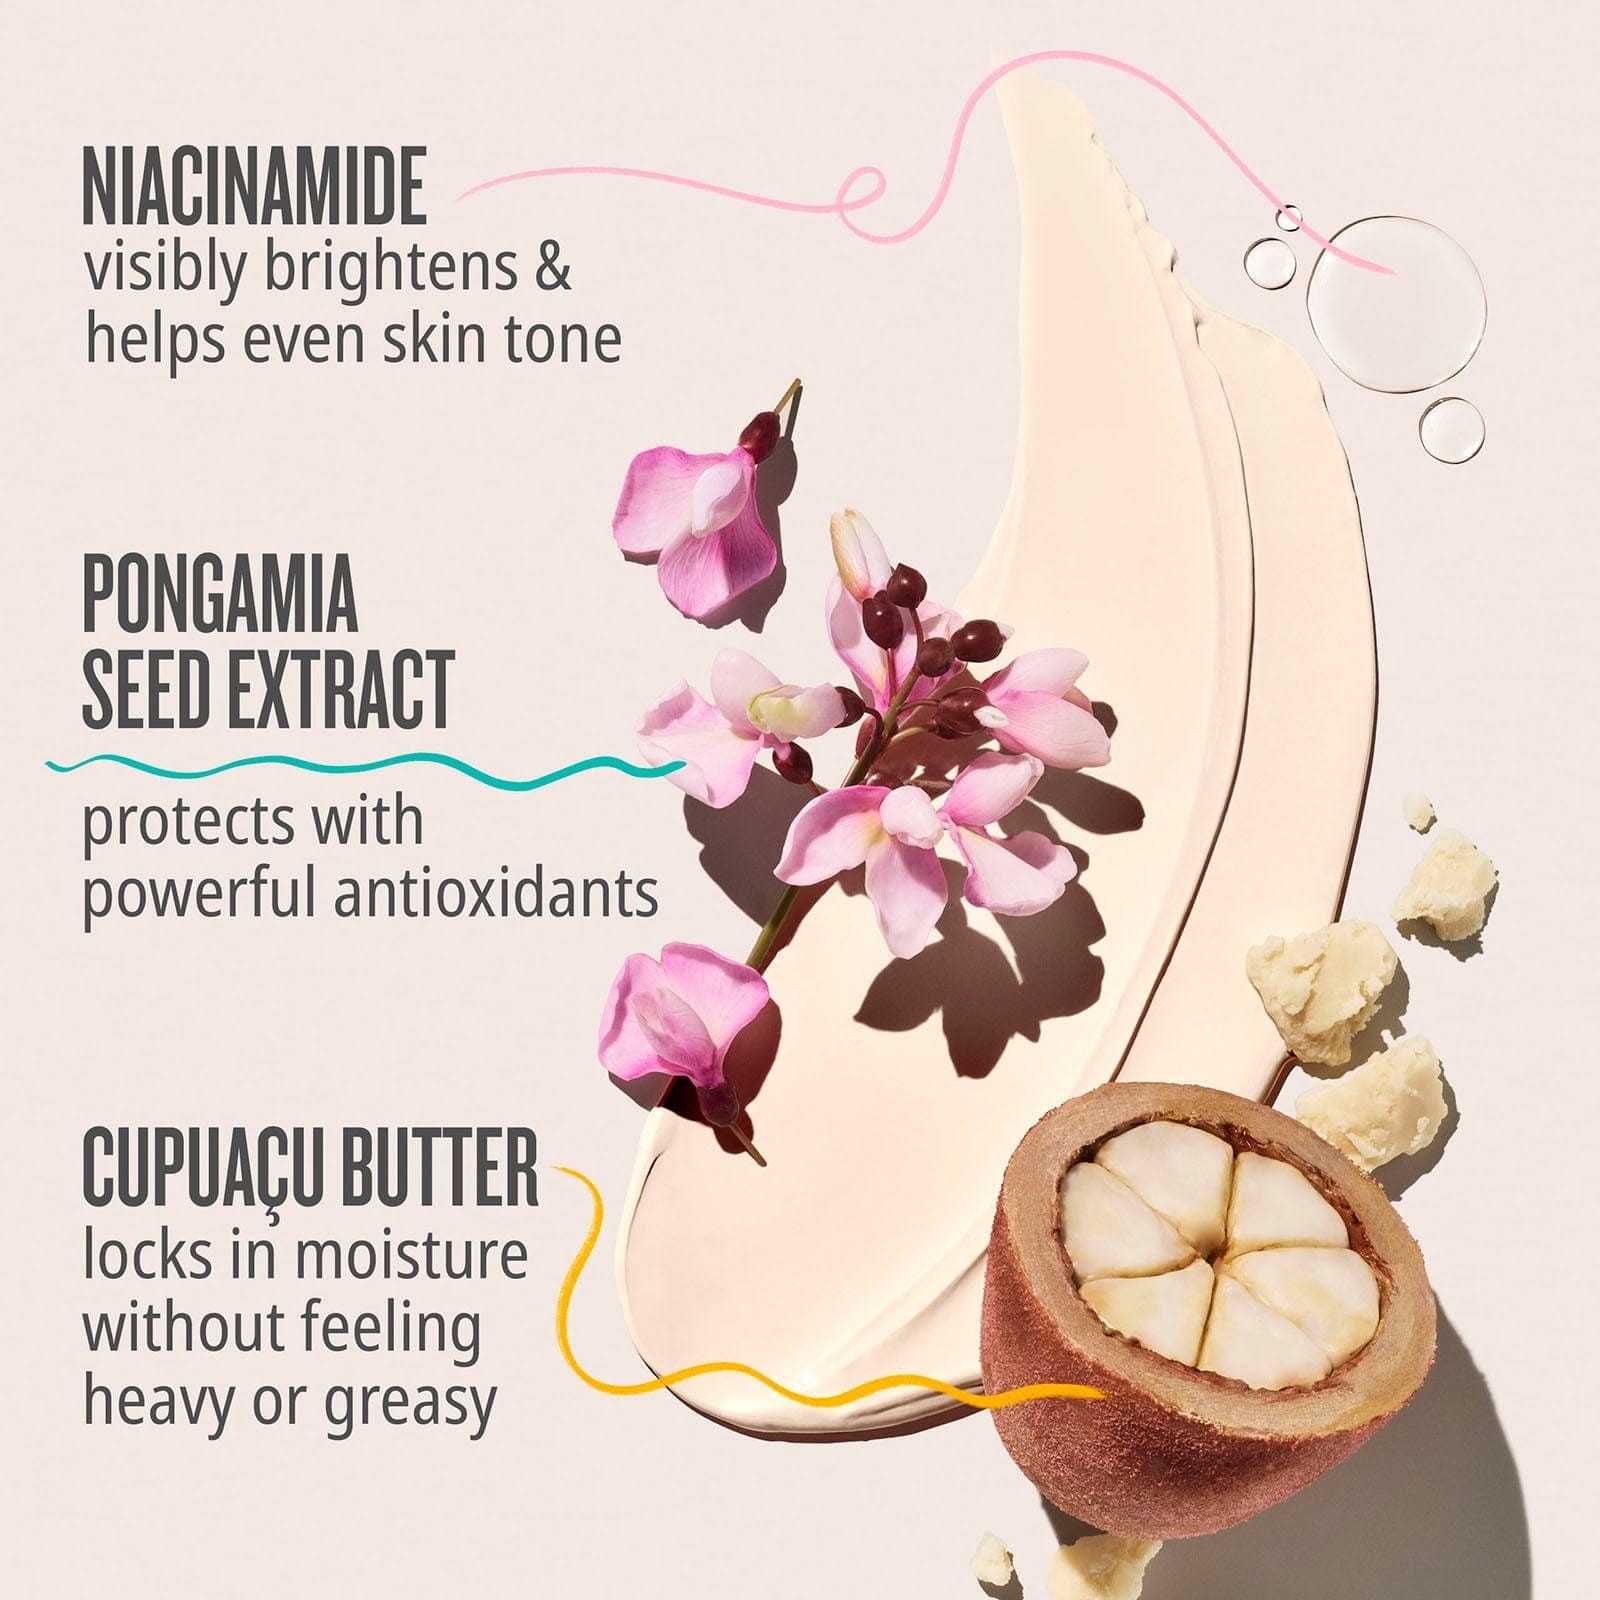 Niacinamide - visibly brightens &amp; helps even skin tone. Pongamia seed extract - protects with powerful antioxidants, cupuacu butter - locks in moisture without feeling heavy or greasy